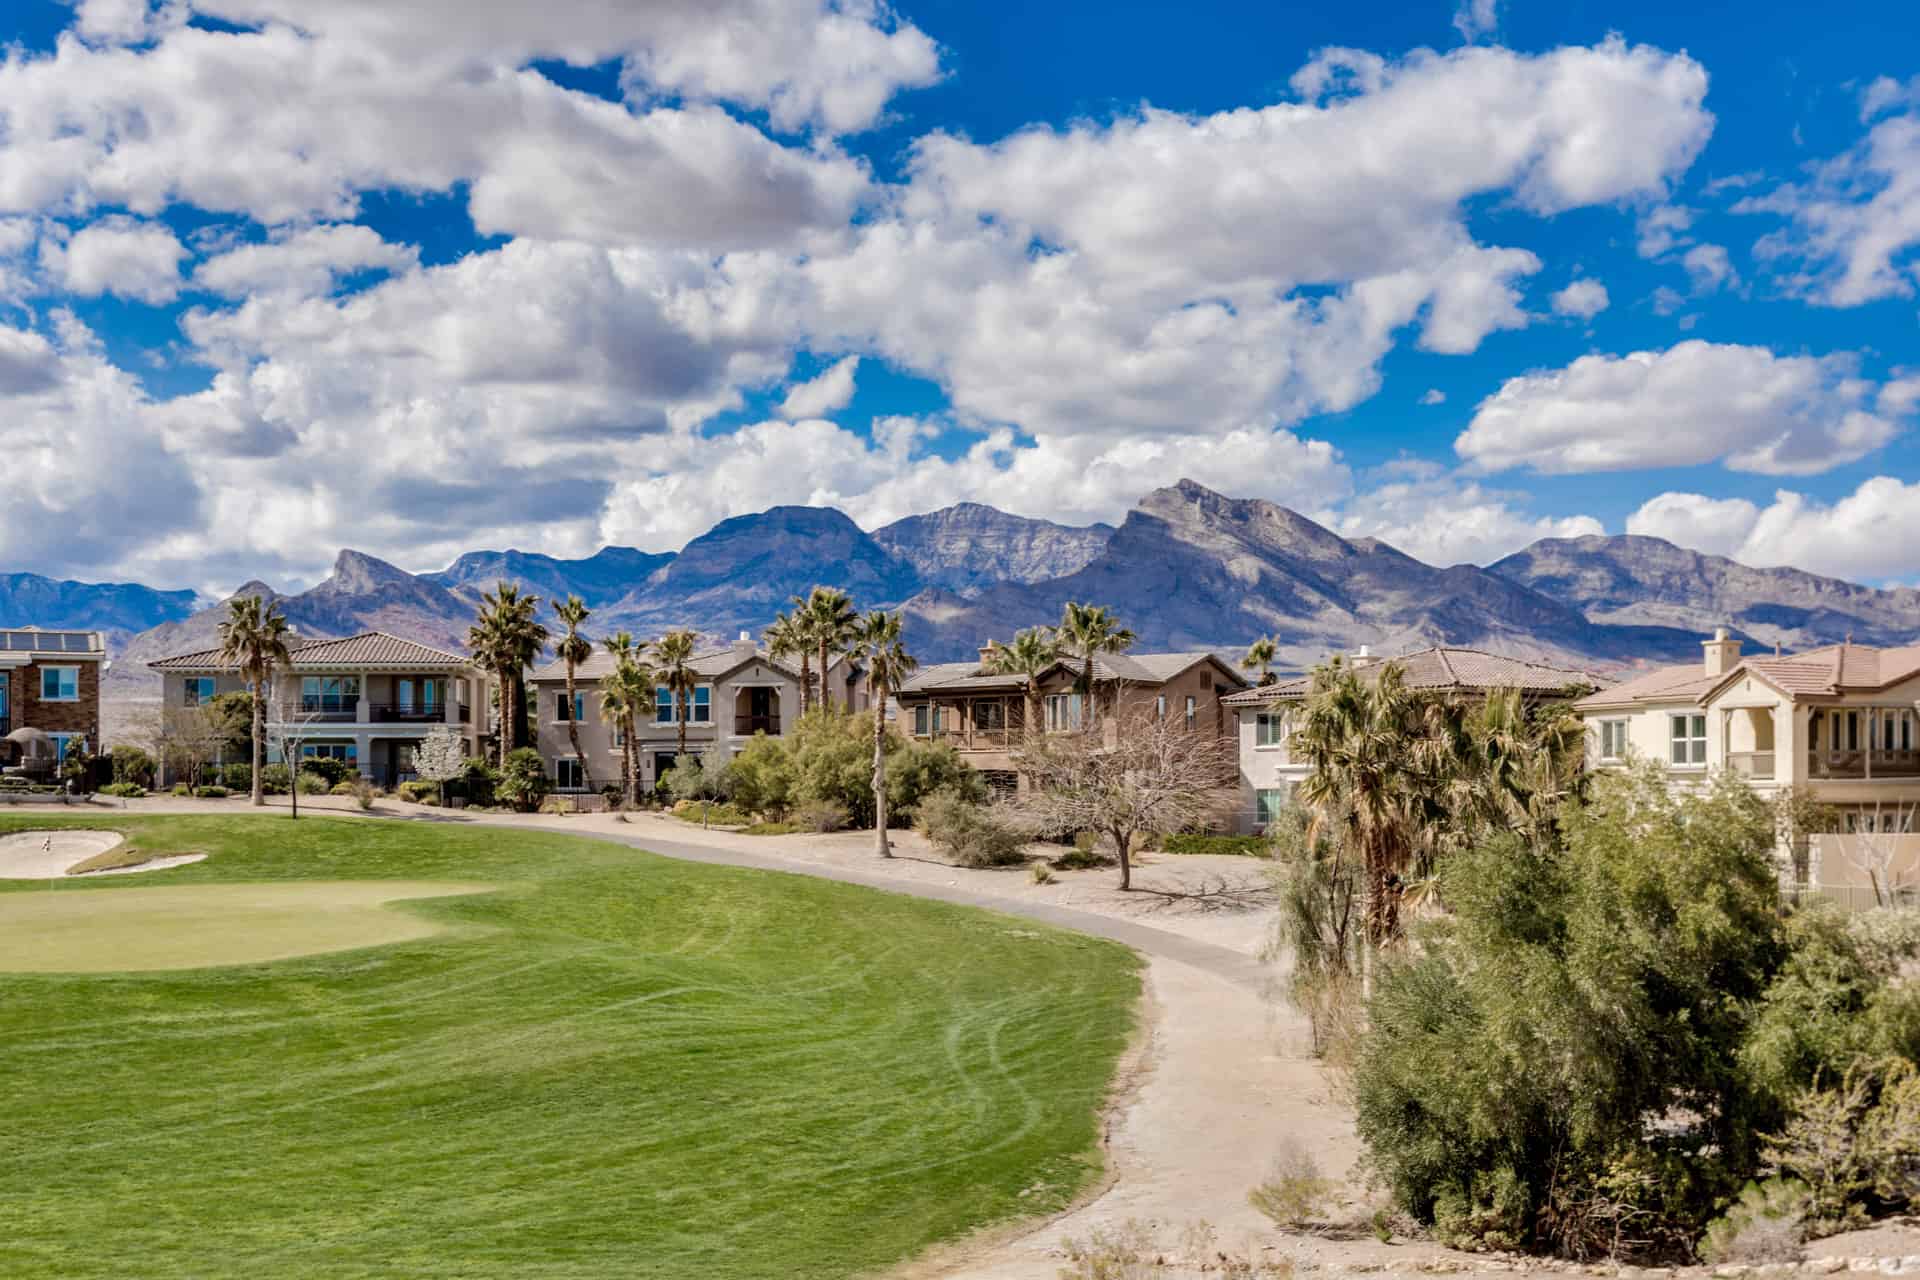 las-vegas-luxry-real-estate-realtor-rob-jensen-company-1947-orchard-mist-street-red-rock-country-club27